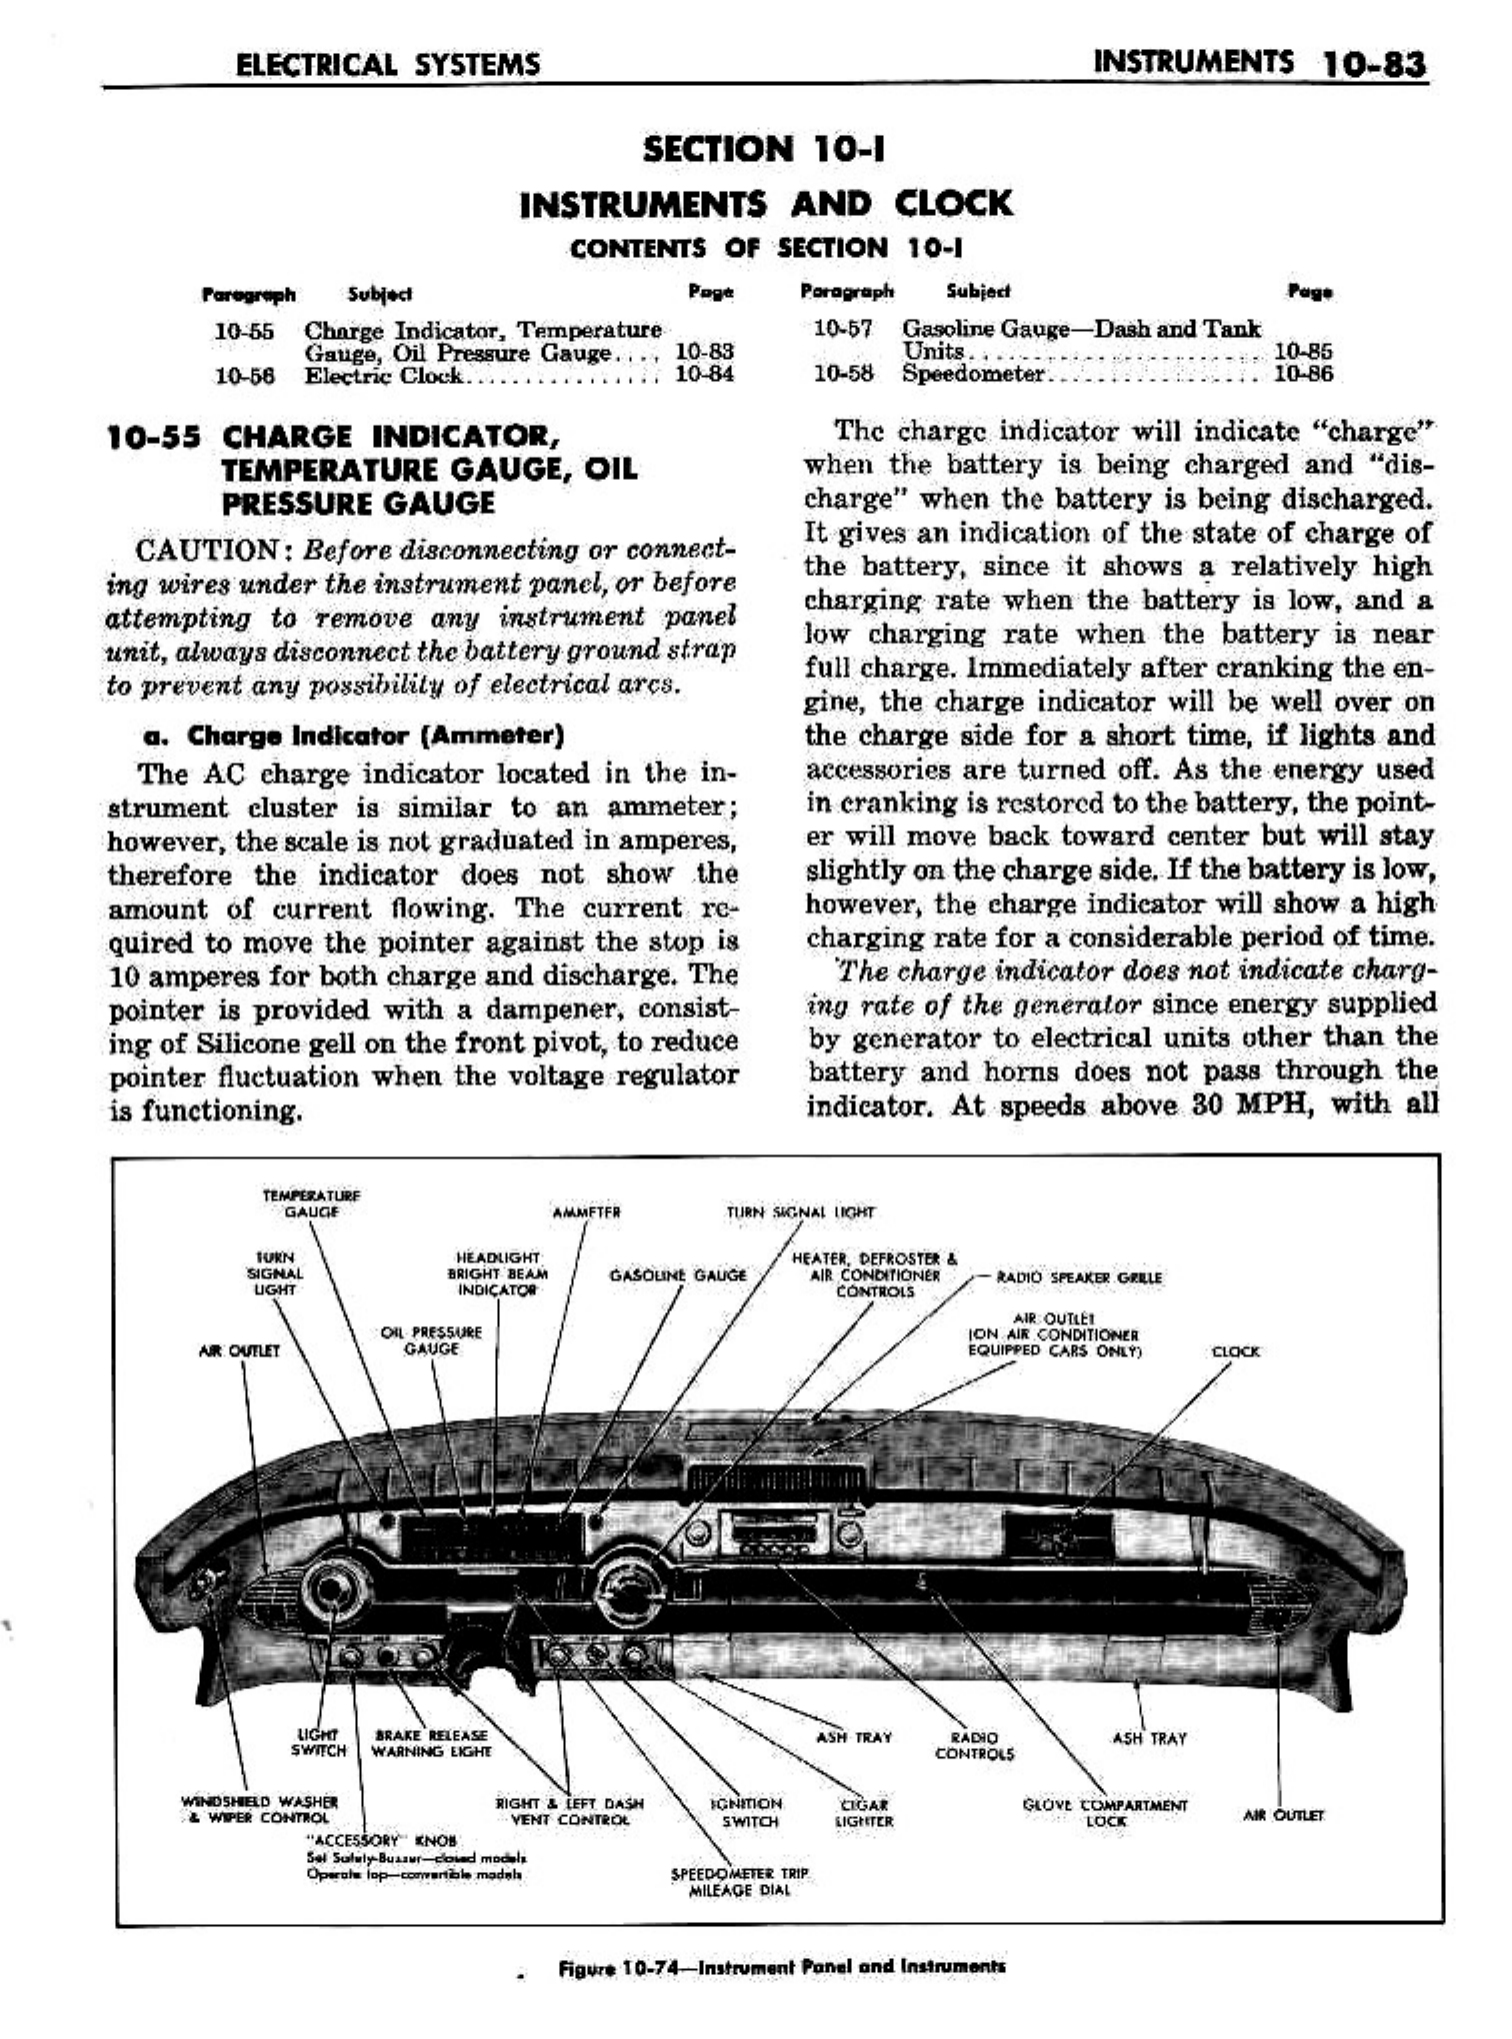 n_11 1958 Buick Shop Manual - Electrical Systems_83.jpg